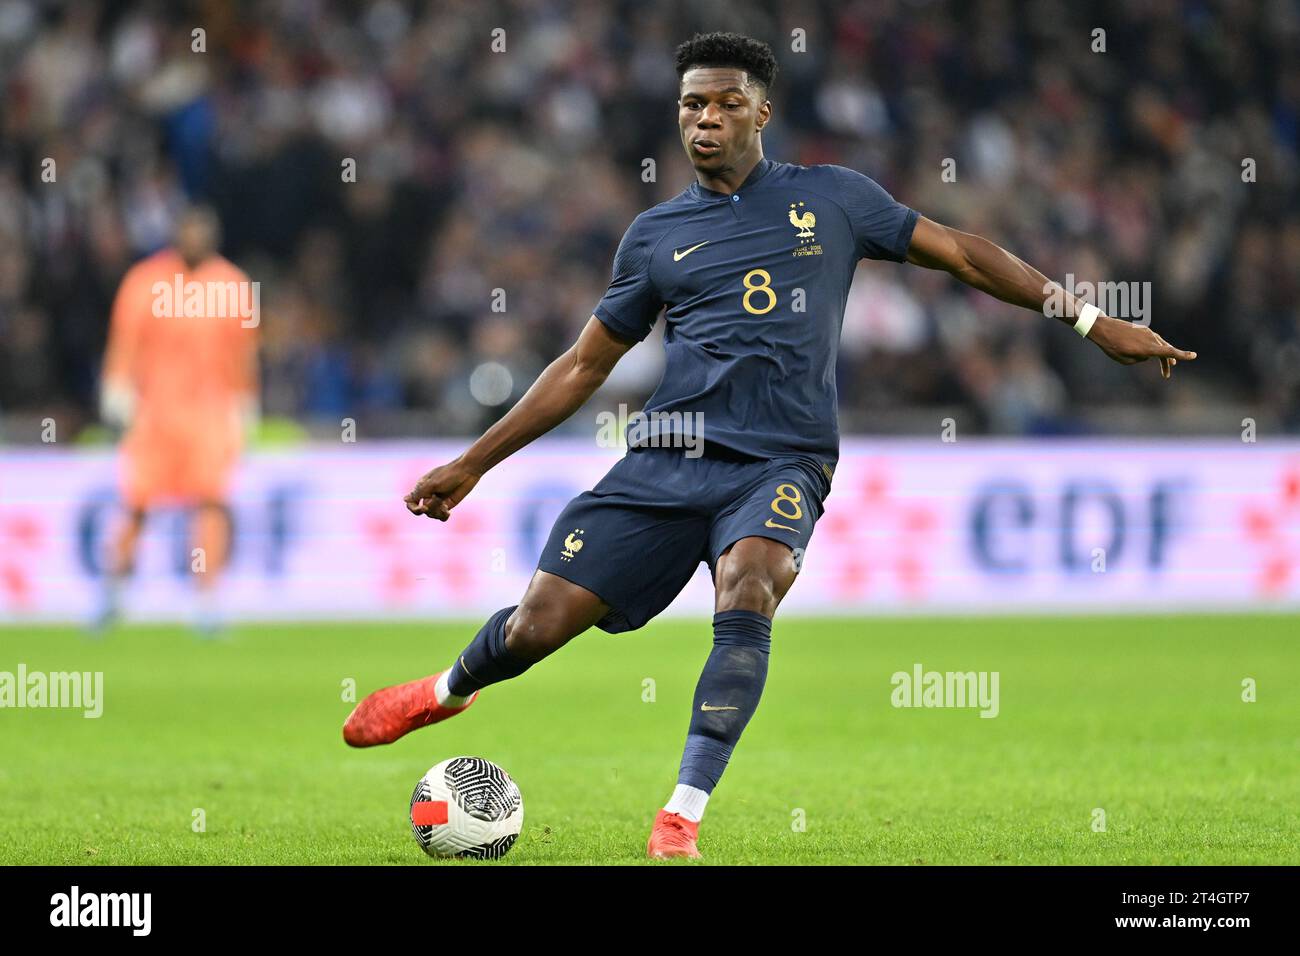 Aurelien Tchouameni (8) of France pictured during a soccer game between the national teams of France and Scotland in friendly game, on October 17 , 2023 in Lille, France. (Photo by David Catry / Sportpix) Stock Photo